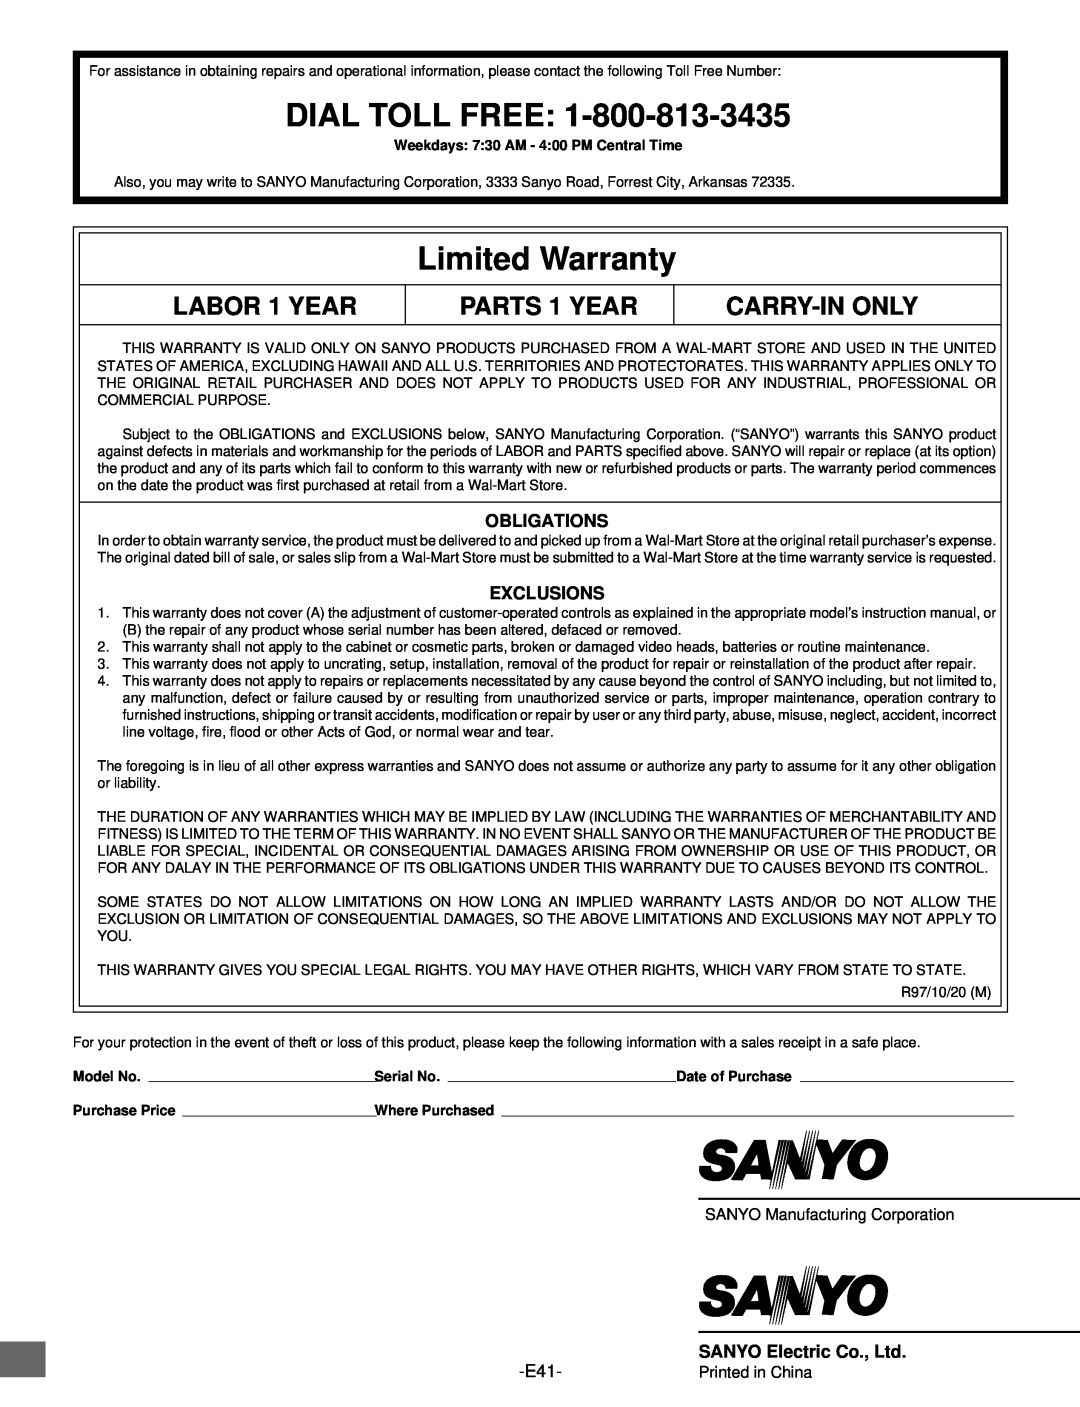 Sanyo DWM-2500 Dial Toll Free, Limited Warranty, LABOR 1 YEAR, PARTS 1 YEAR, Carry-Inonly, Model No, Serial No 